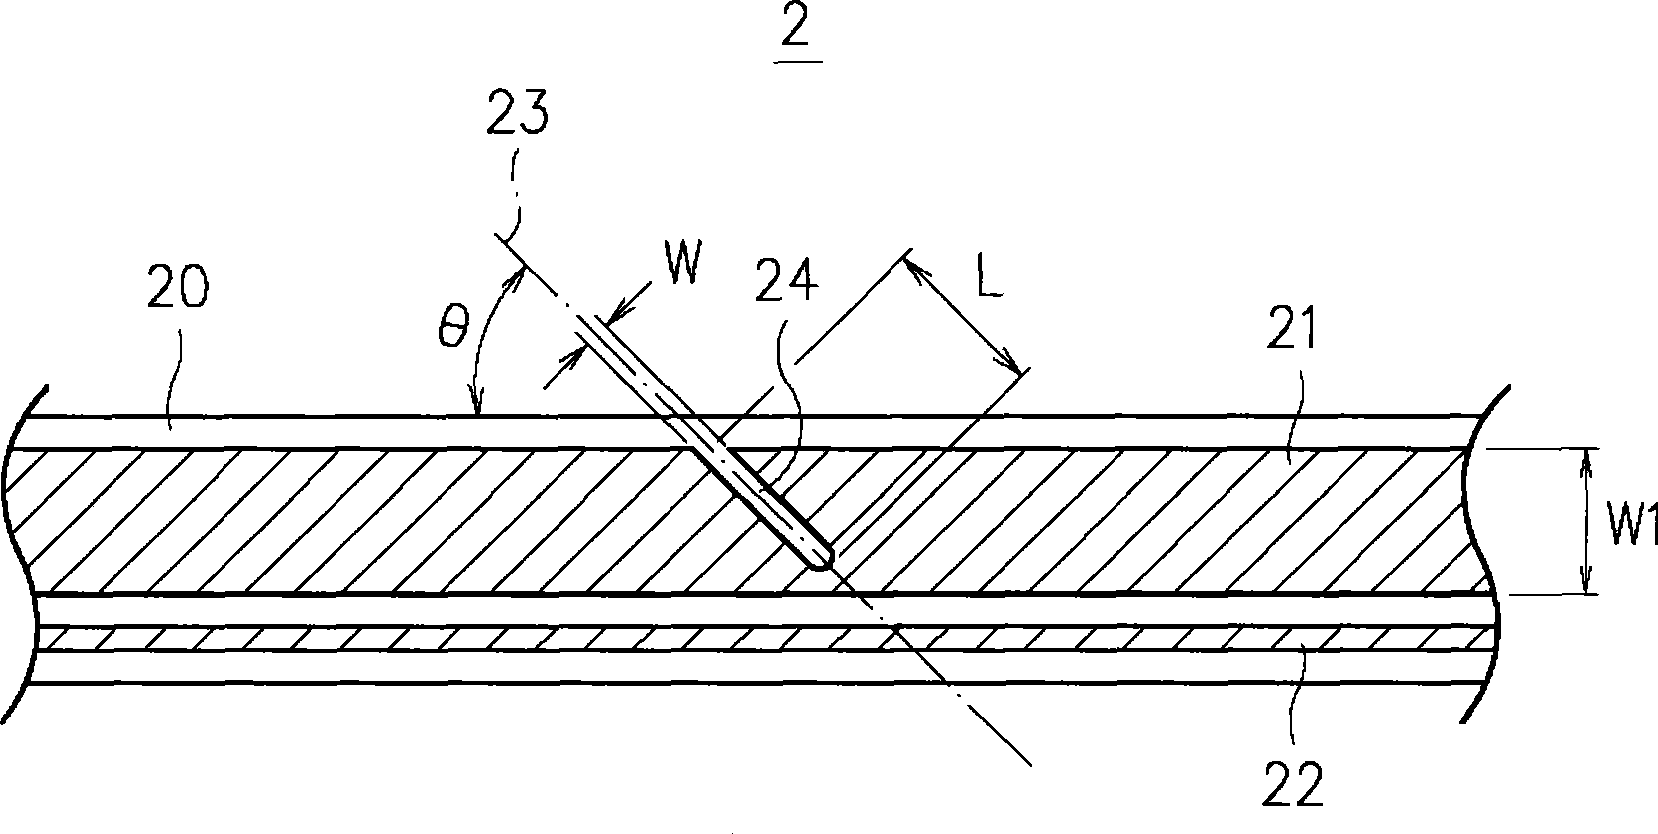 Design of bending region structure of flexible printed circuit board